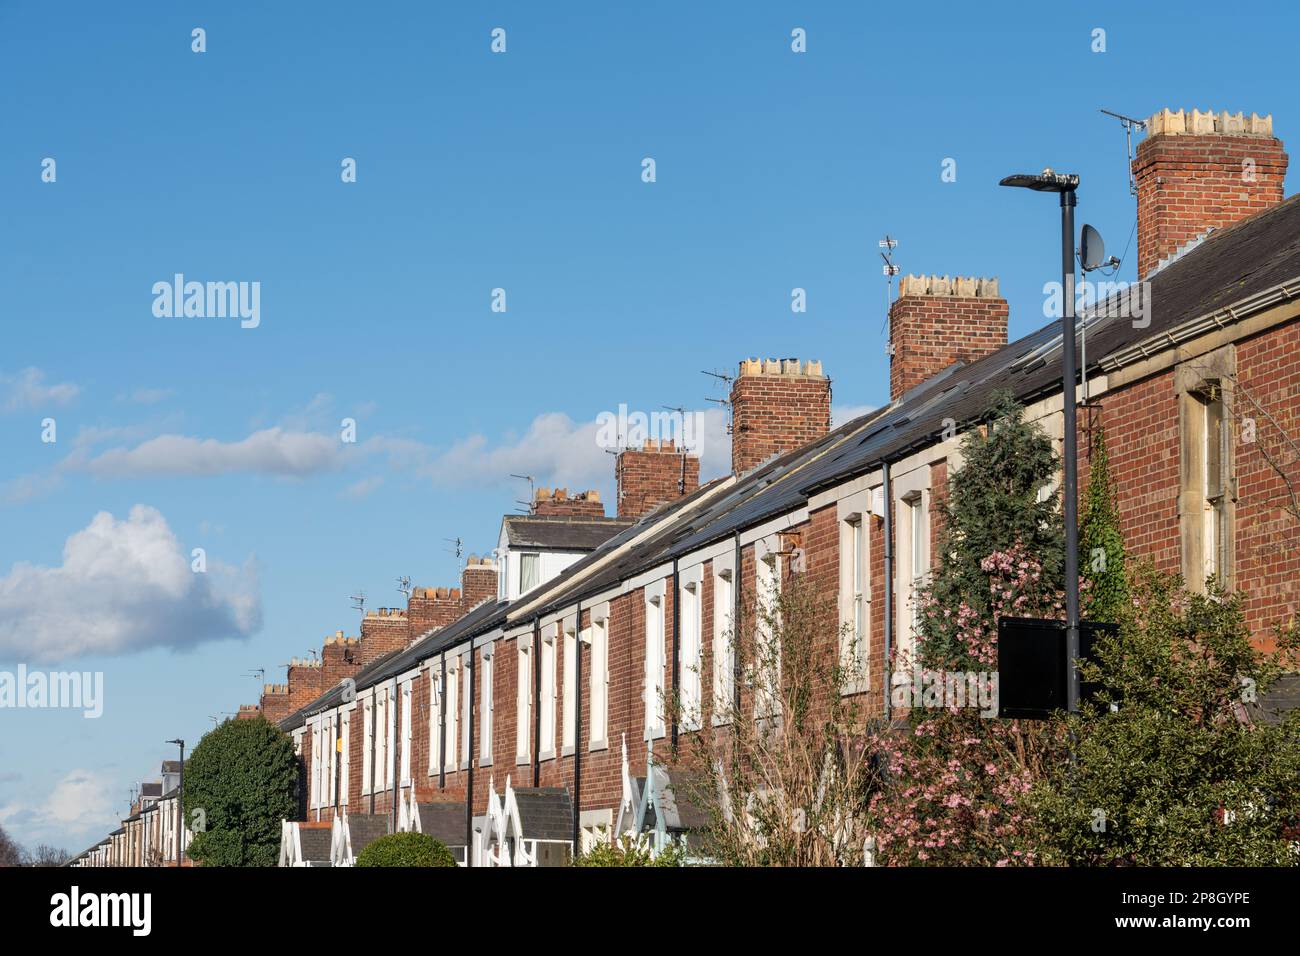 A suburban terrace of houses in the UK. Concept of the property market. Stock Photo